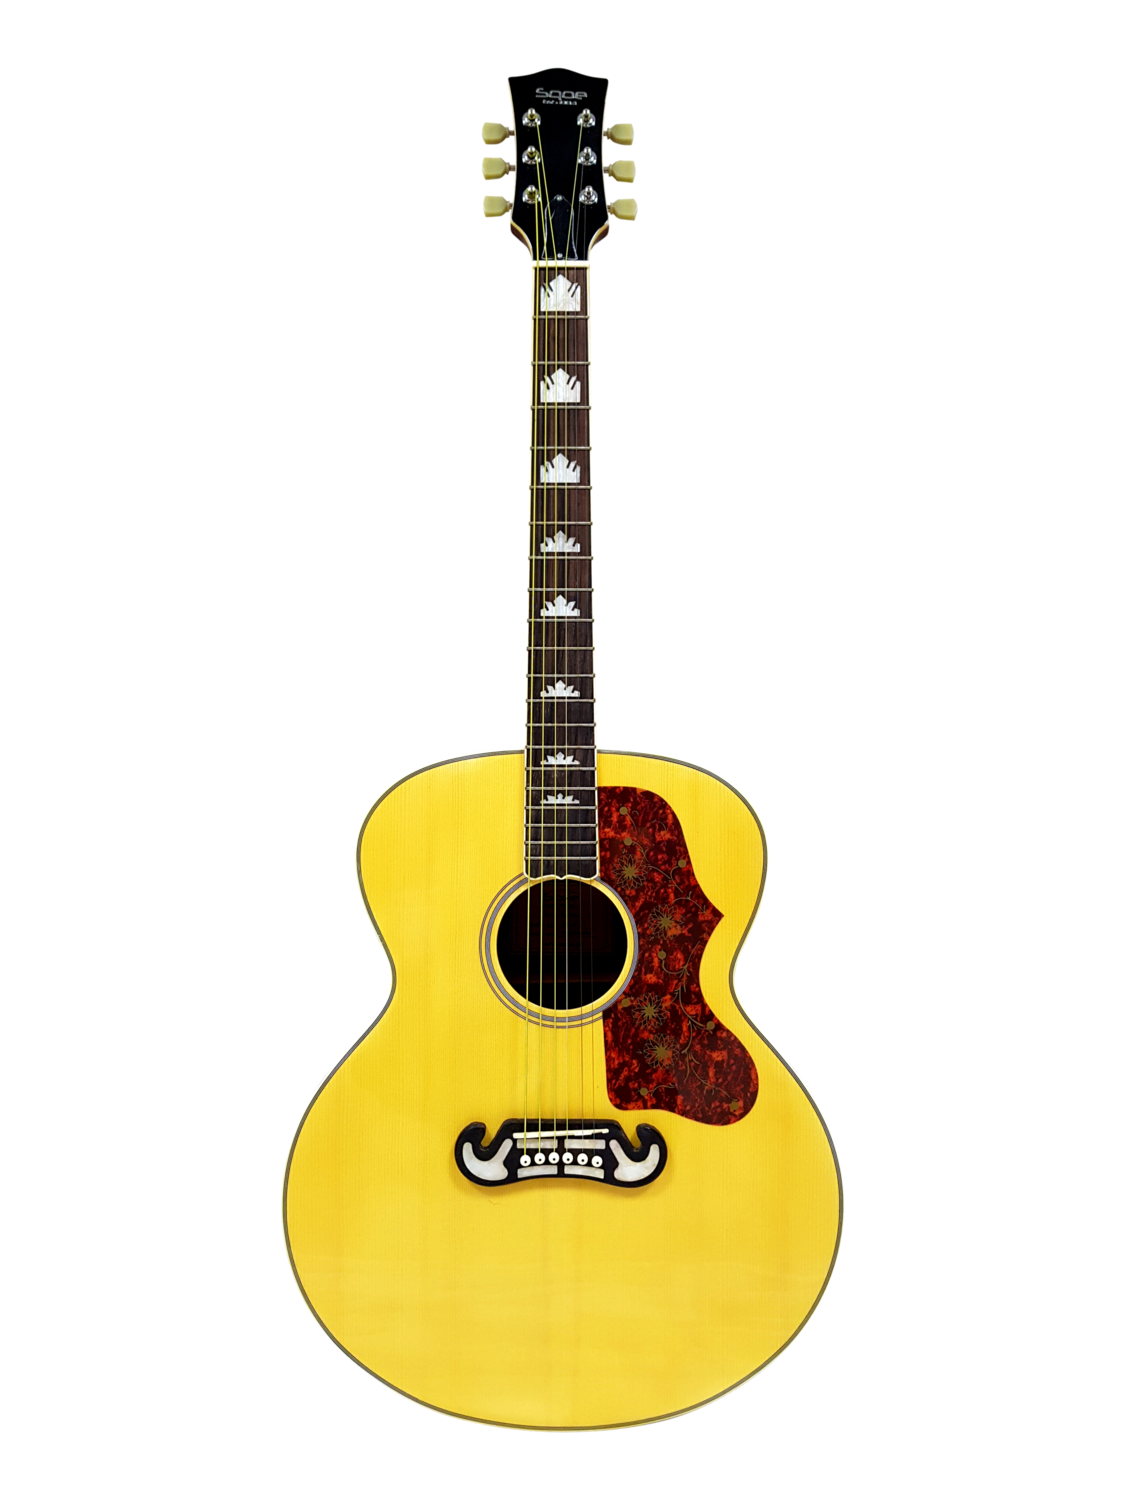 Sqoe 42" Natural Colour Acoustic Guitar with Leather Bag and pick.